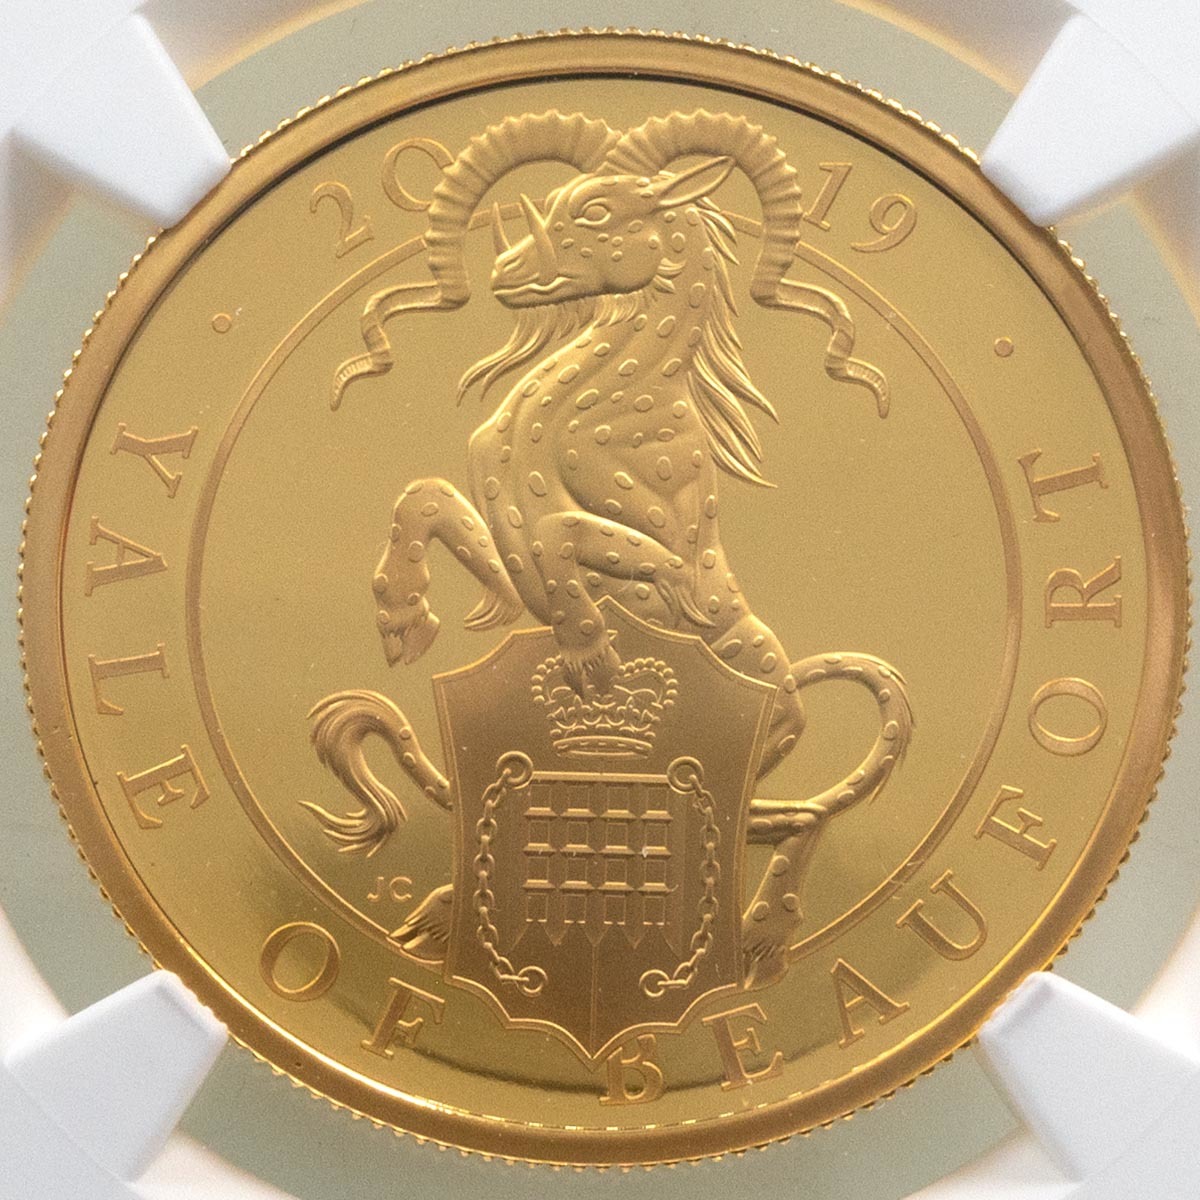 UK19QYGP 2019 Queen's Beasts Yale Of Beaufort One Ounce Gold Proof Coin NGC Graded PF 70 Ultra Cameo Reverse